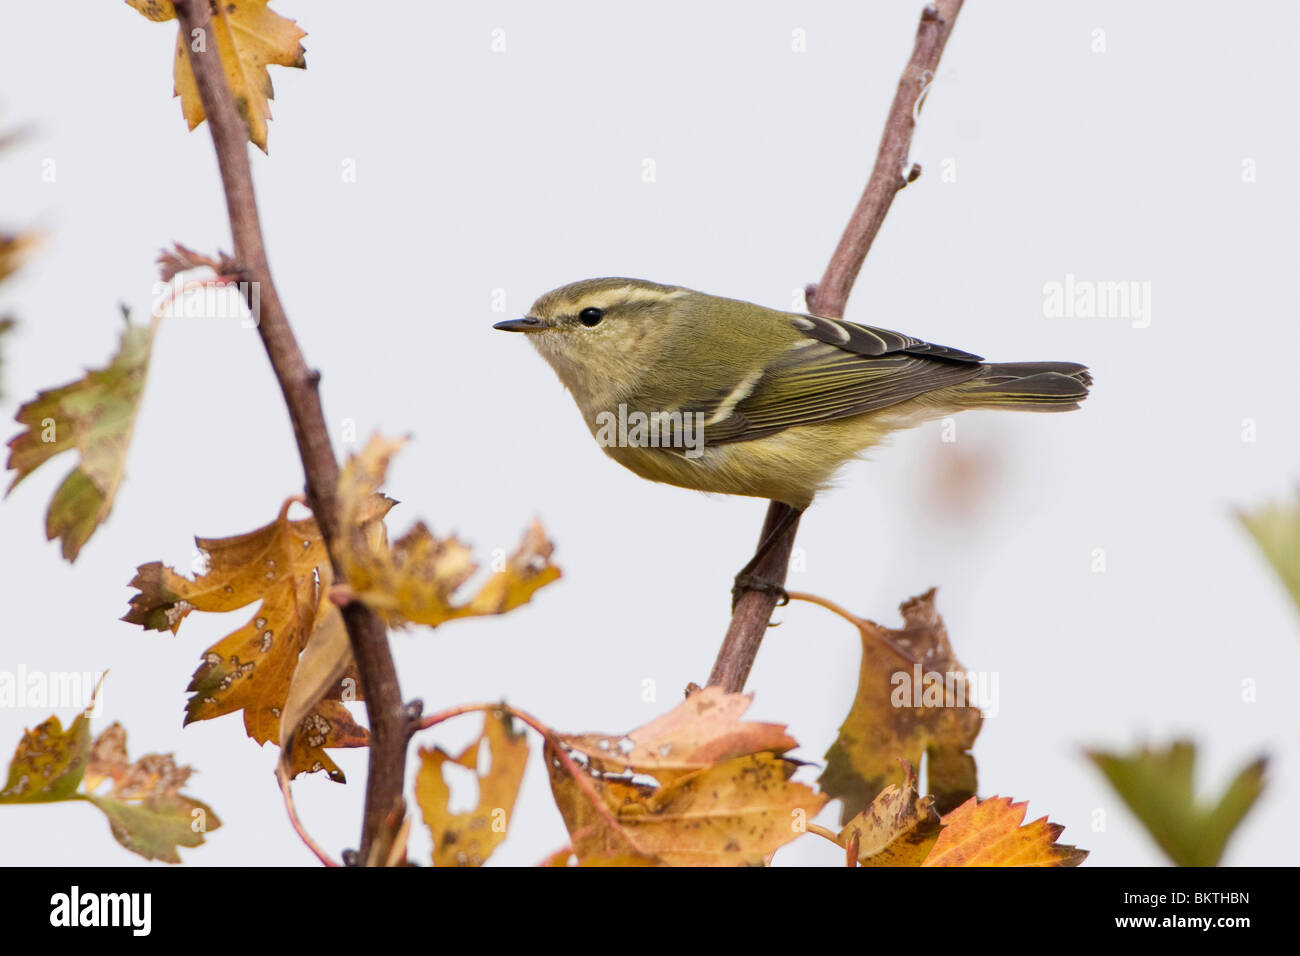 Hume's Leaf Warbler in a tree with autumn leaves Stock Photo